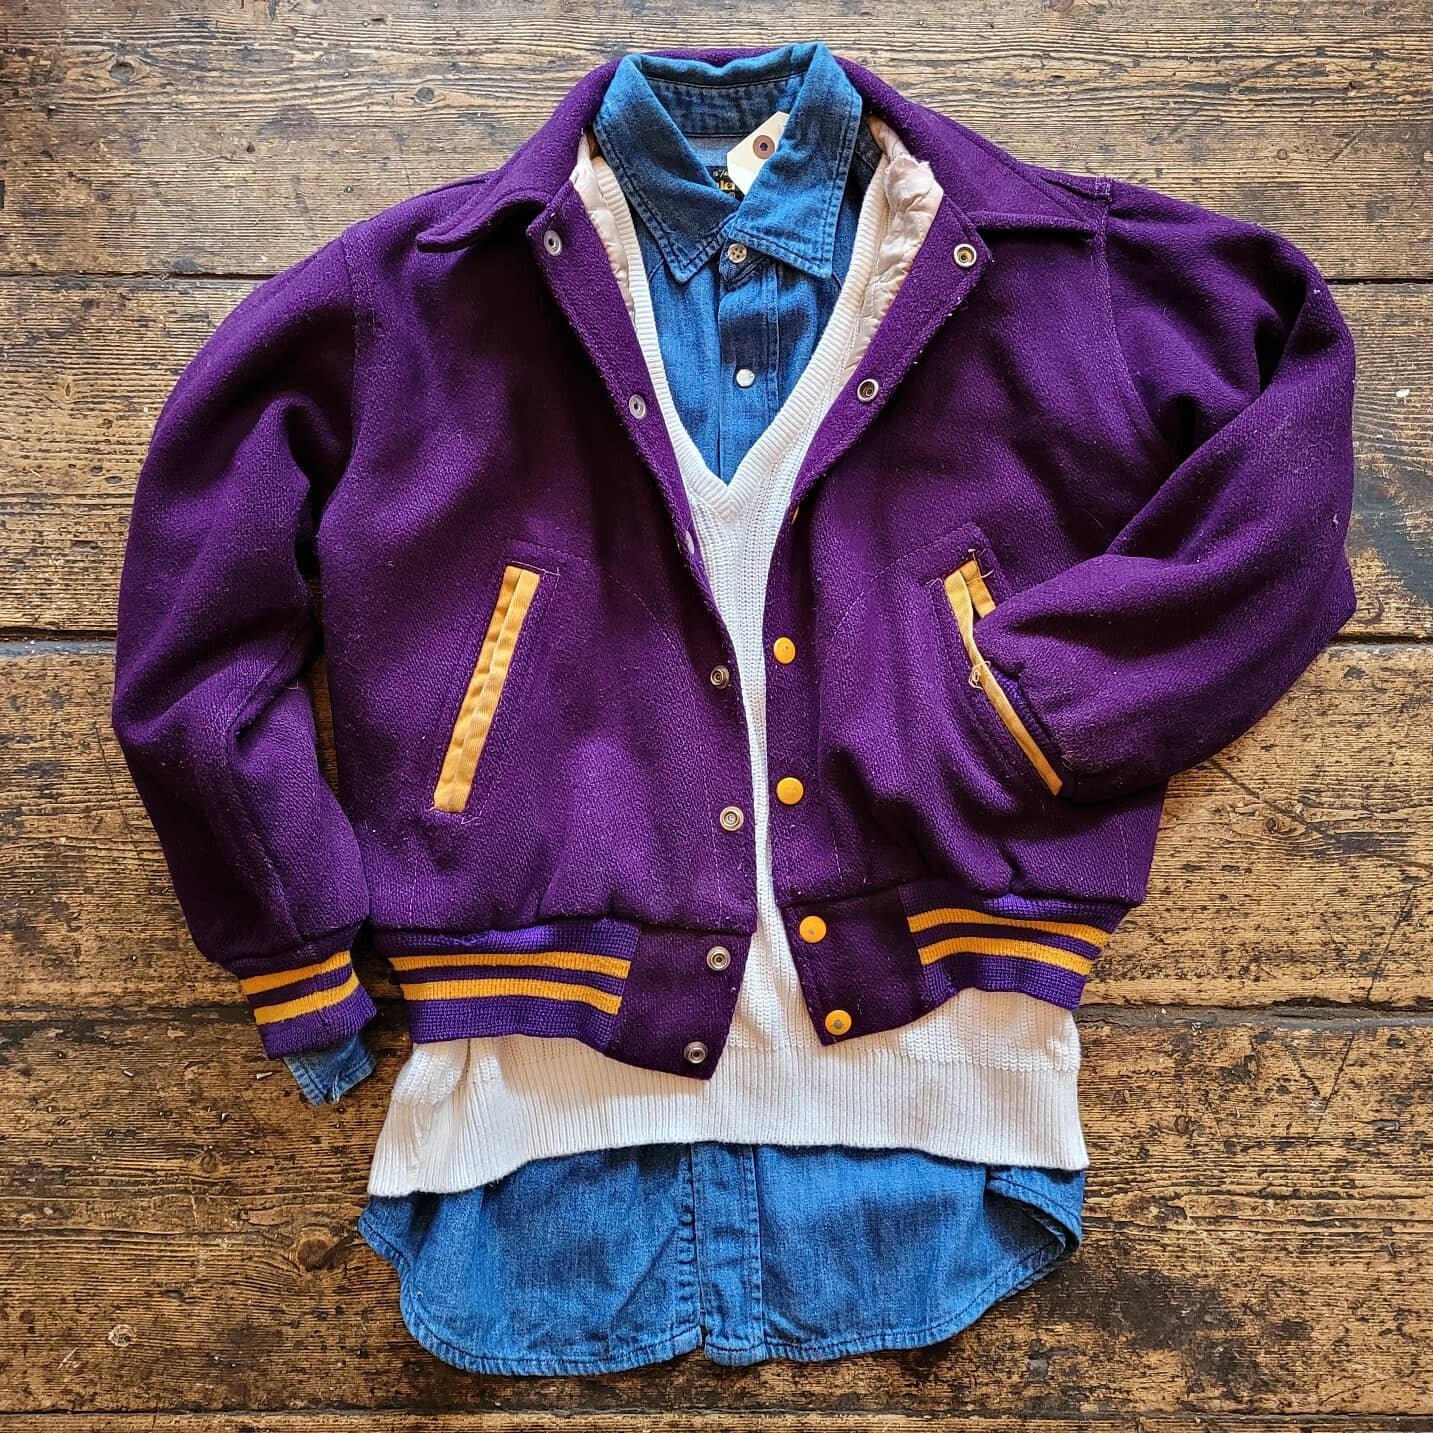 Todays outfit, Spring layering.
.
.
.
1950s varsity jacket, classic 50s style in a very deep purple and yellow, reads Clarkstown across the back, size UK small, &pound;75.
.
.
.
Worn over a very early, made in France, Lacost v neck, size medium, &pou